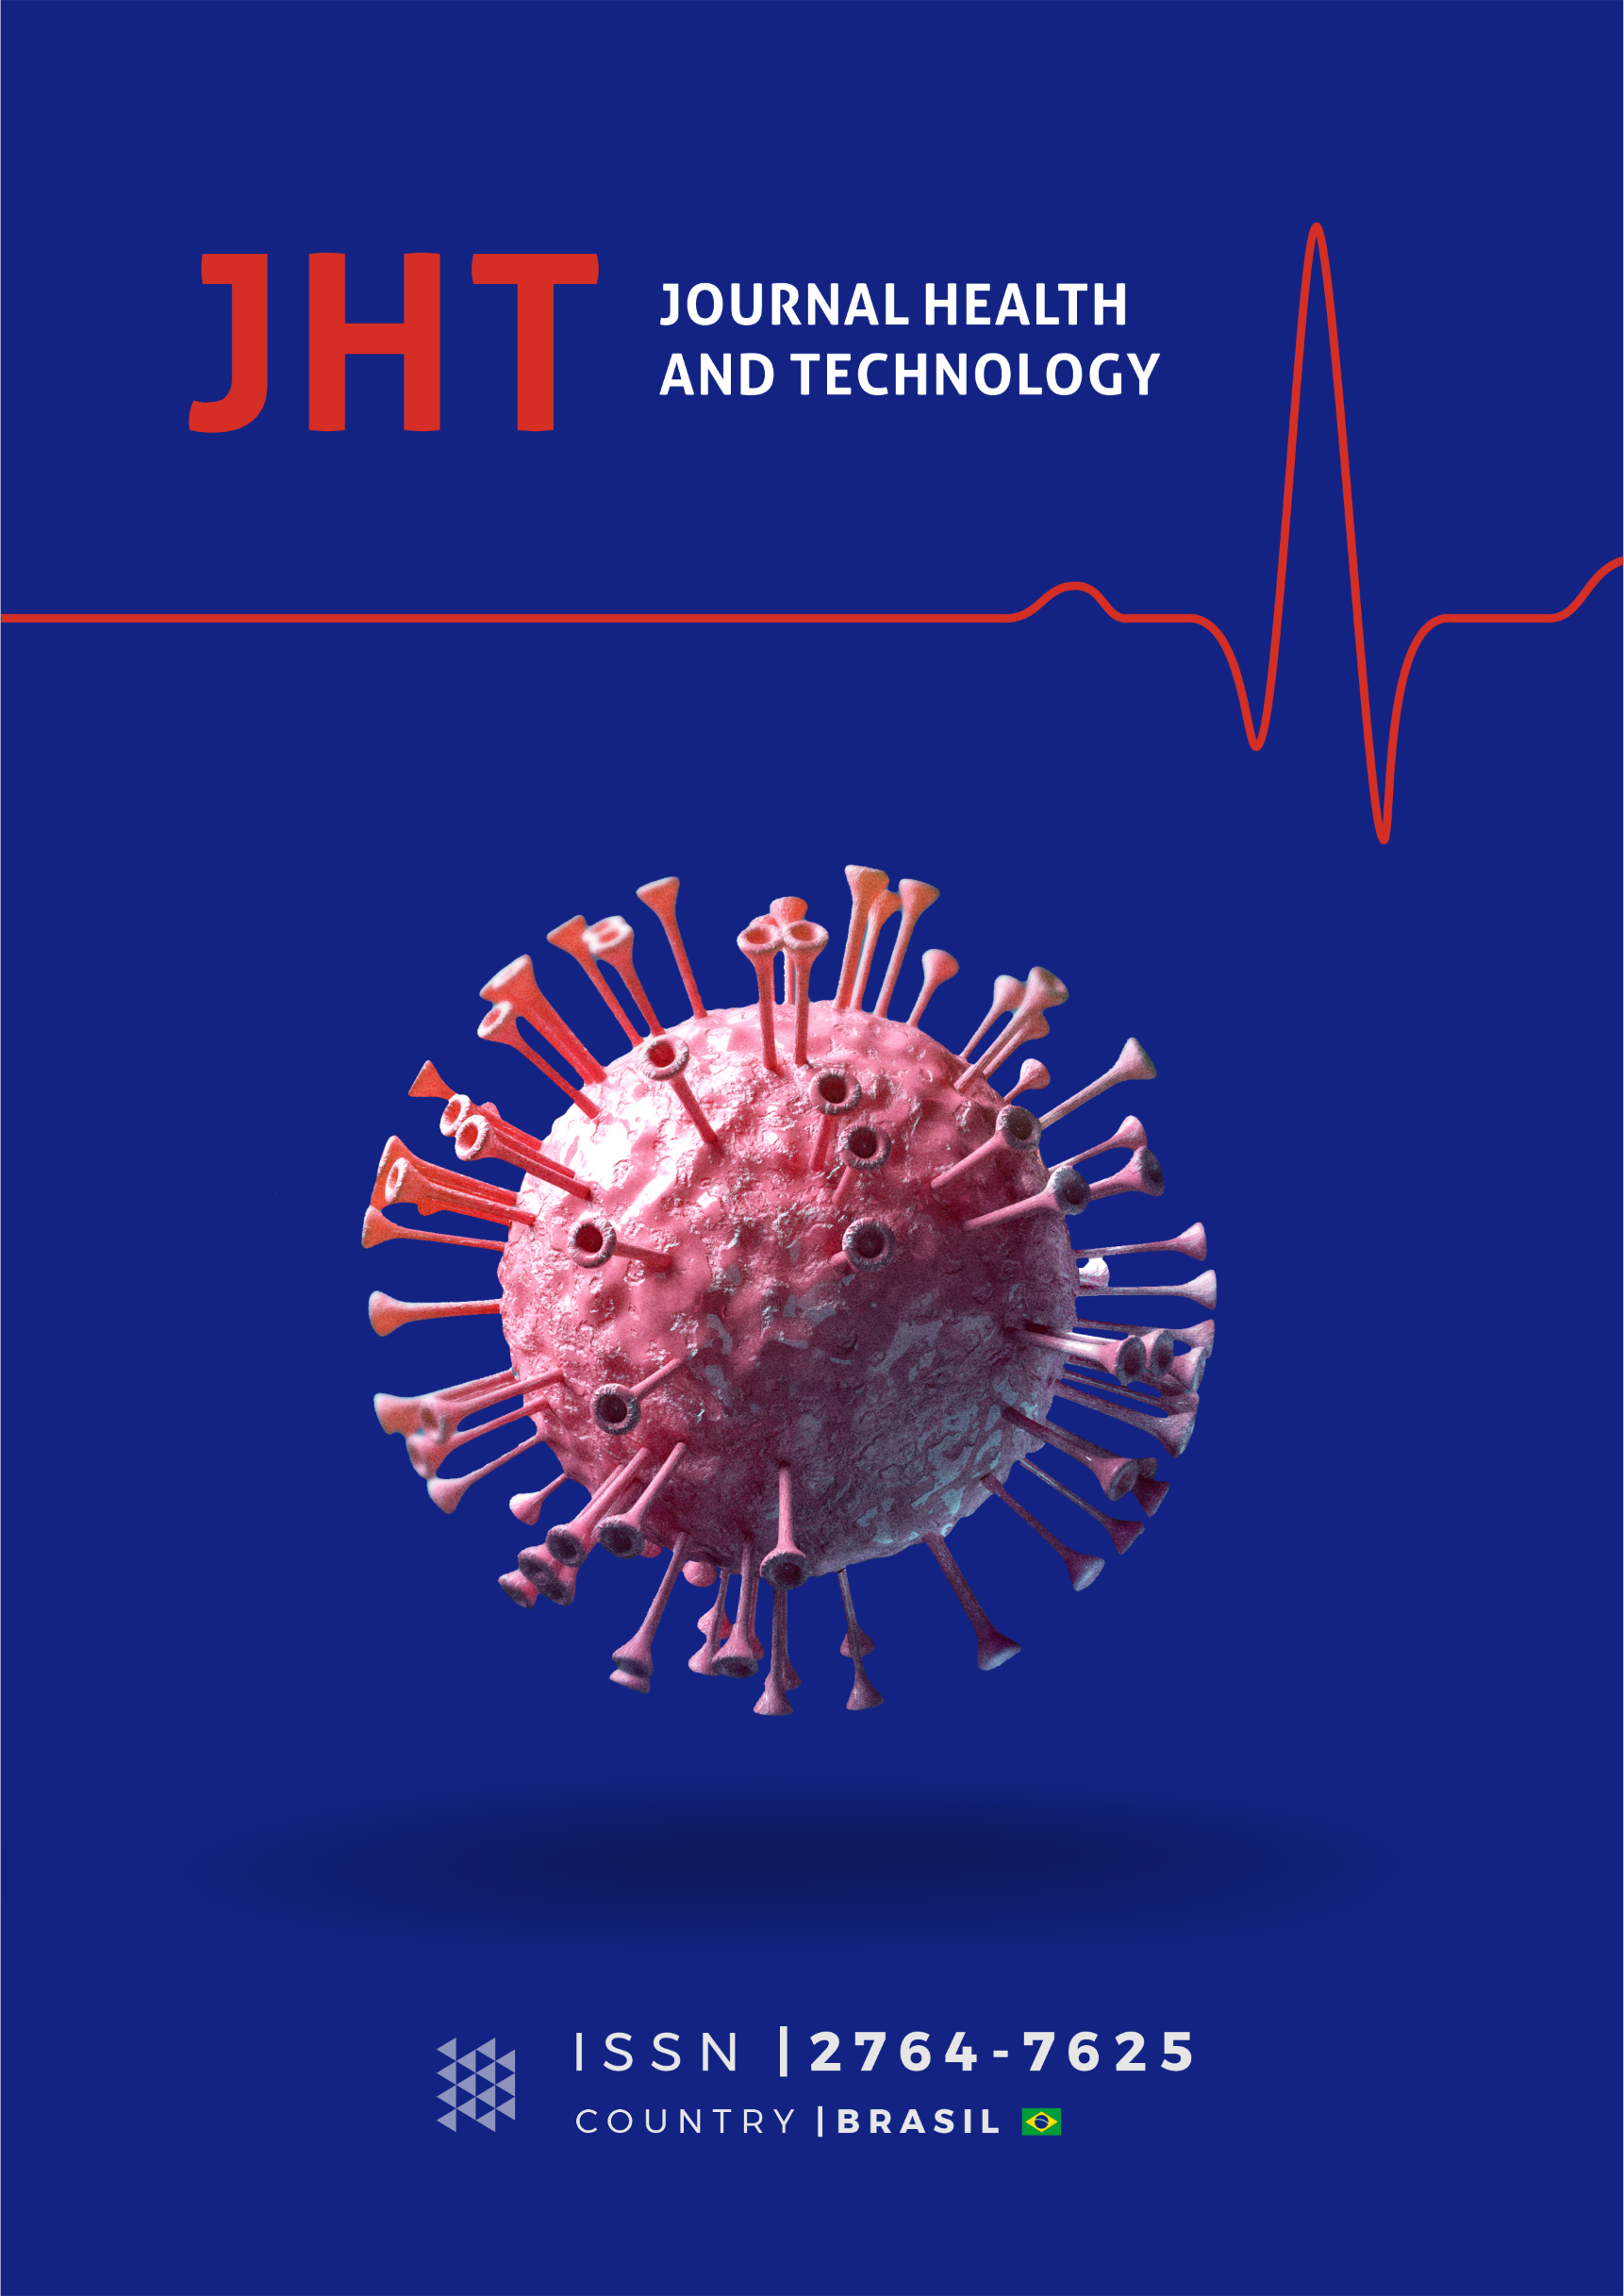 					View Vol. 1 No. 2 (2022): JOURNAL HEALTH AND TECHNOLOGY - JHT
				